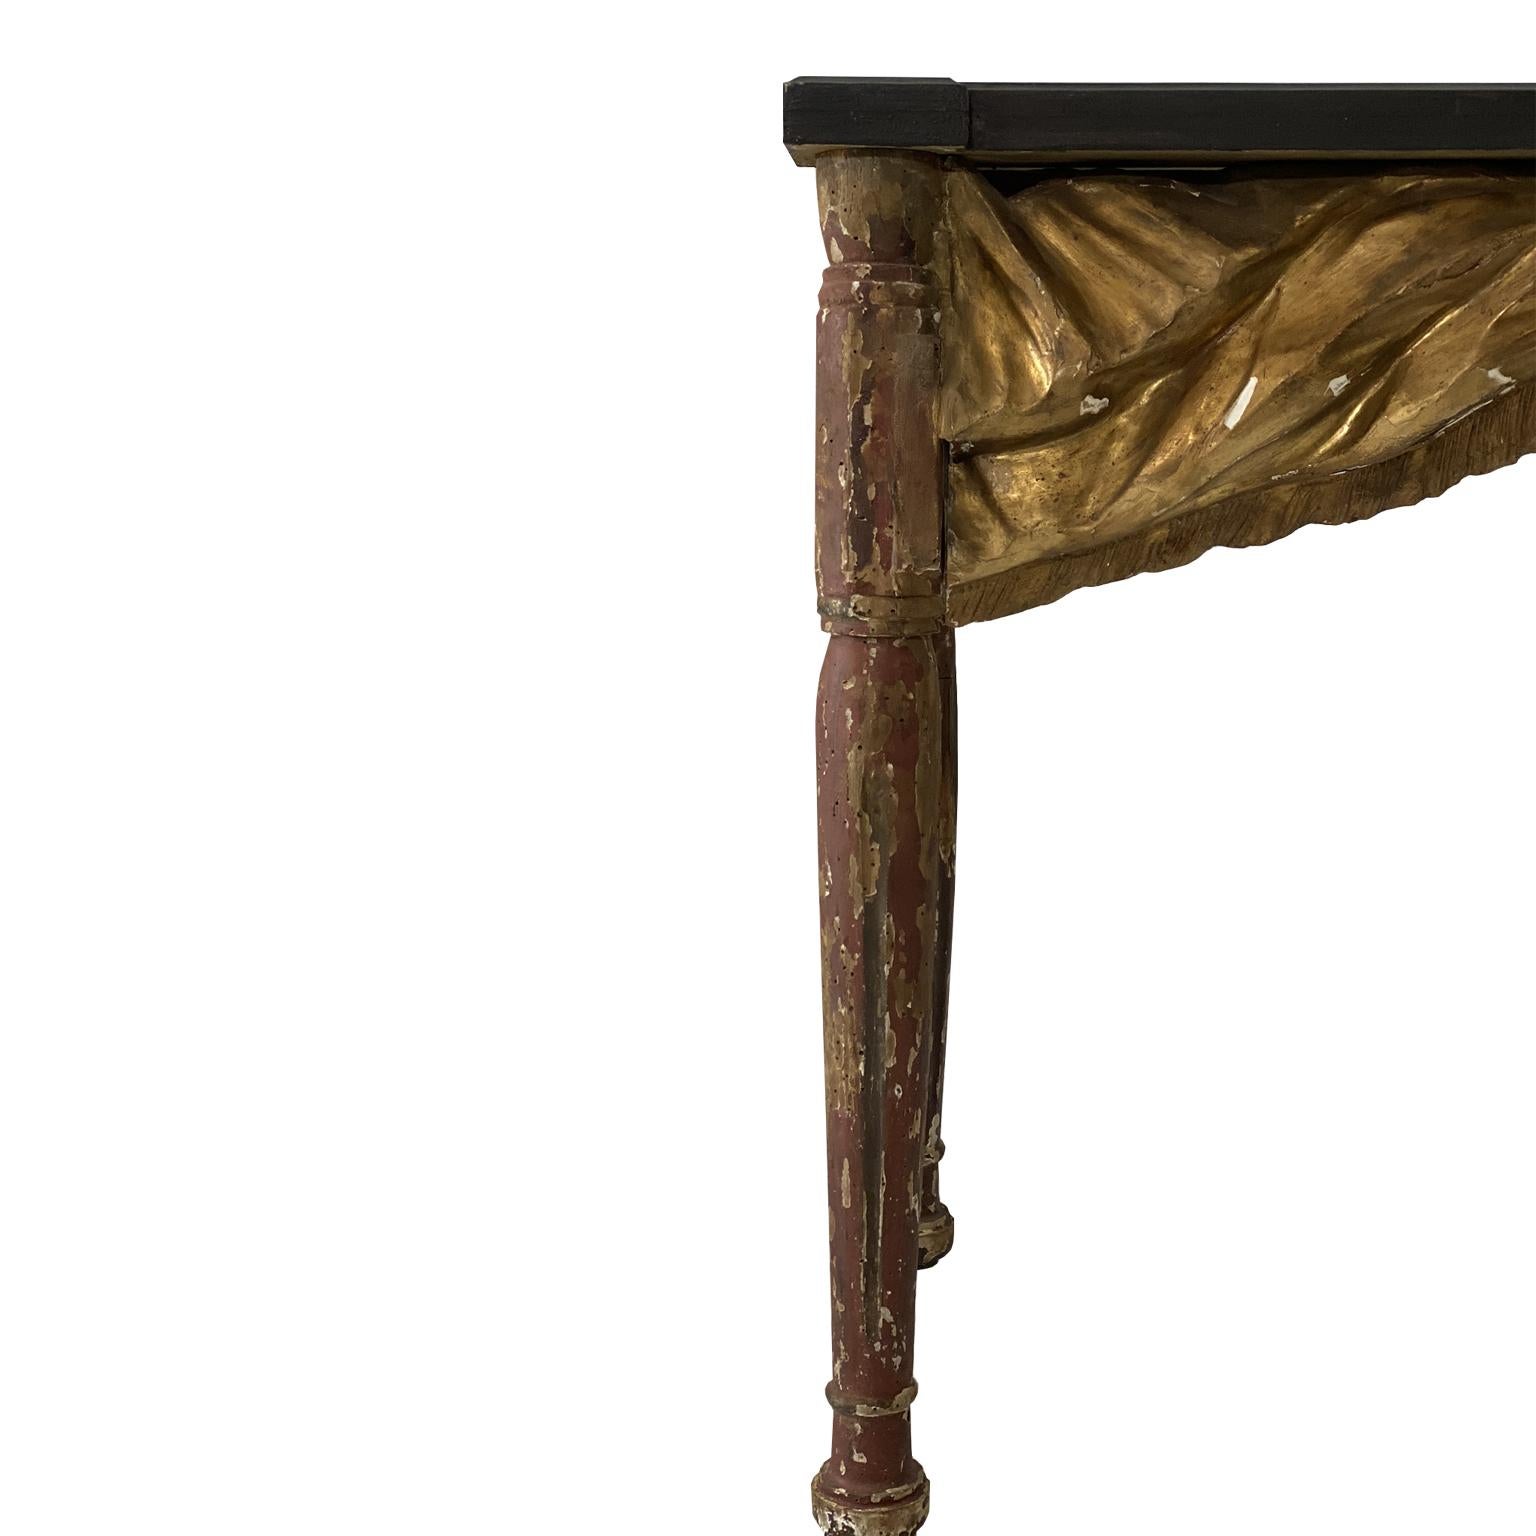 Stunning Italian constructed lacquered and gilded console with 18th and 19th century wood. With an ebony top and a red legs and a stunning gilded ribbon center. This is definitely a statement piece in modern and traditional homes alike.